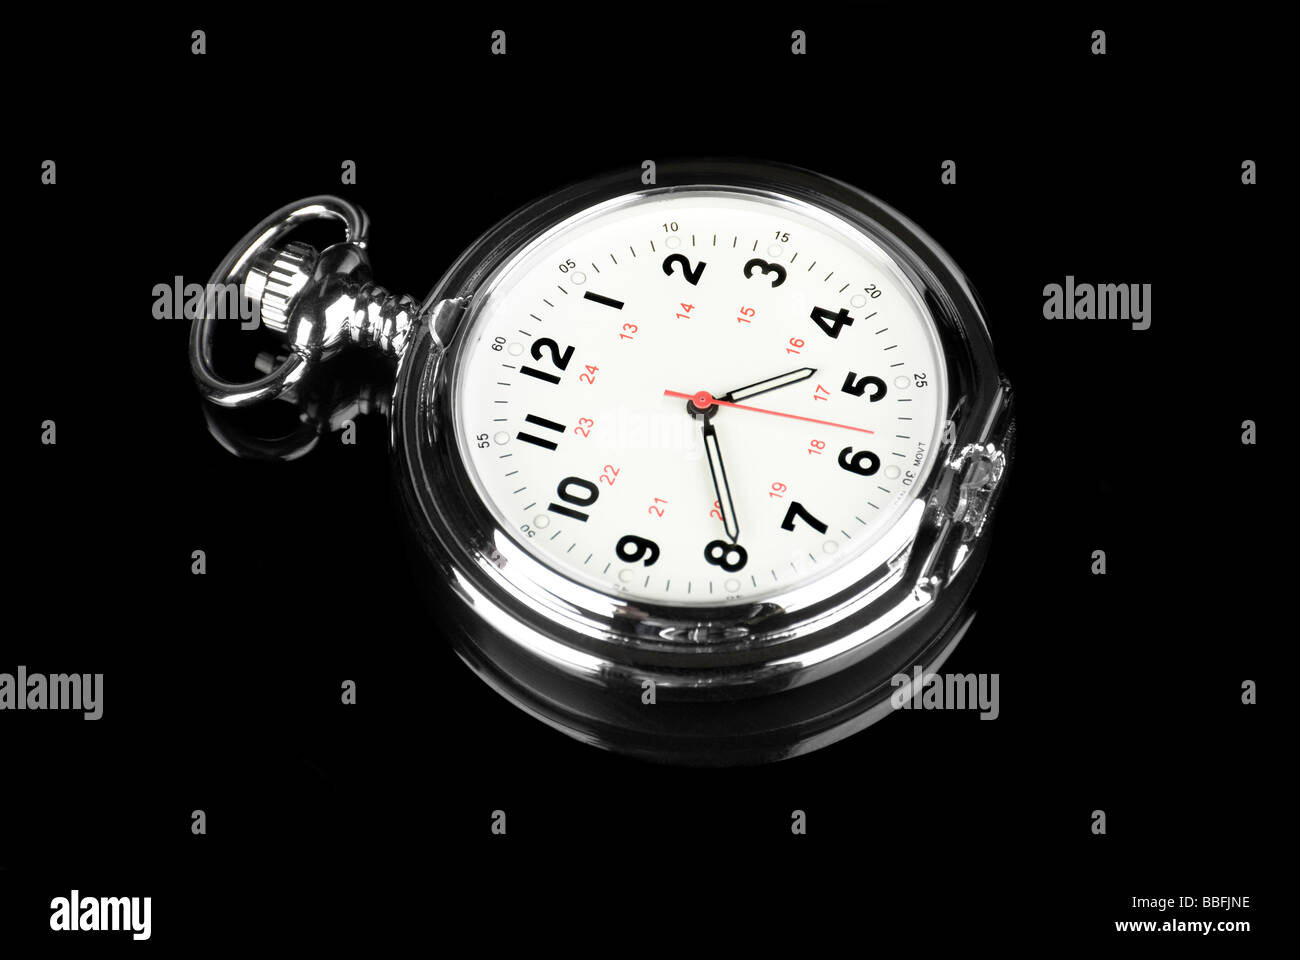 A pocket watch on a reflective black background shows it elegance and style Stock Photo